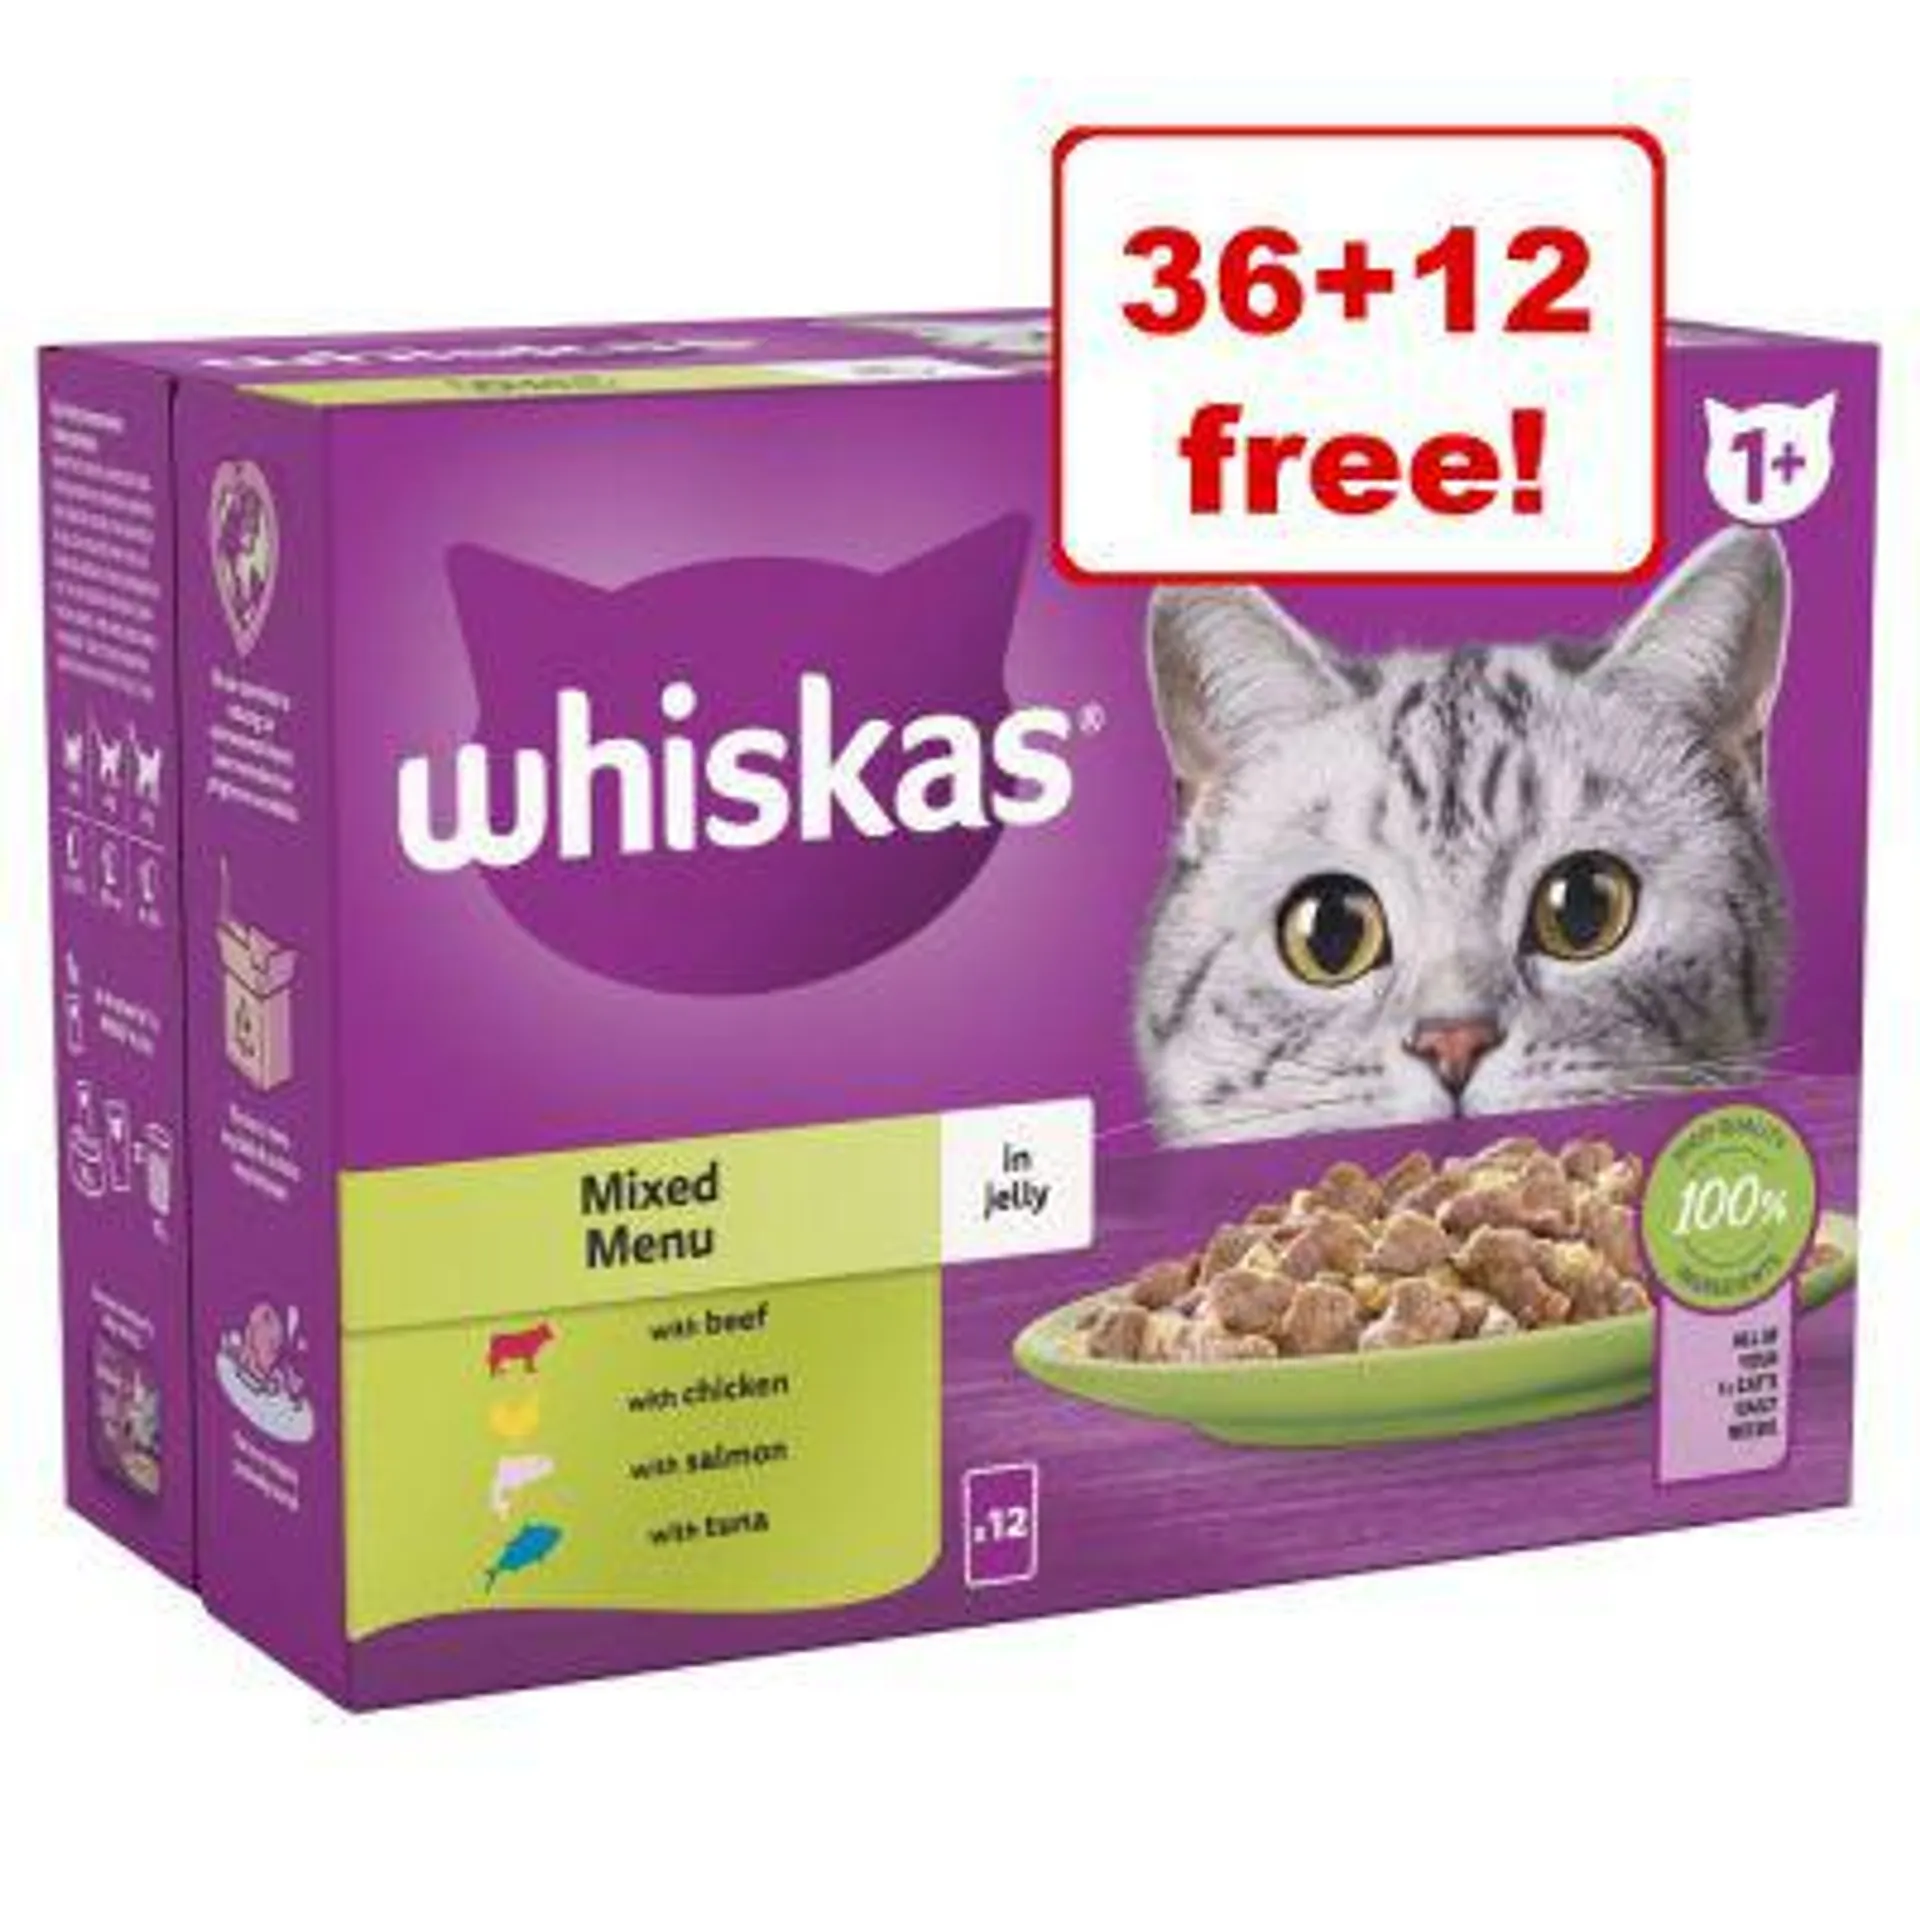 48 x 85g Whiskas Wet Cat Food Pouches - 36 + 12 Free!*